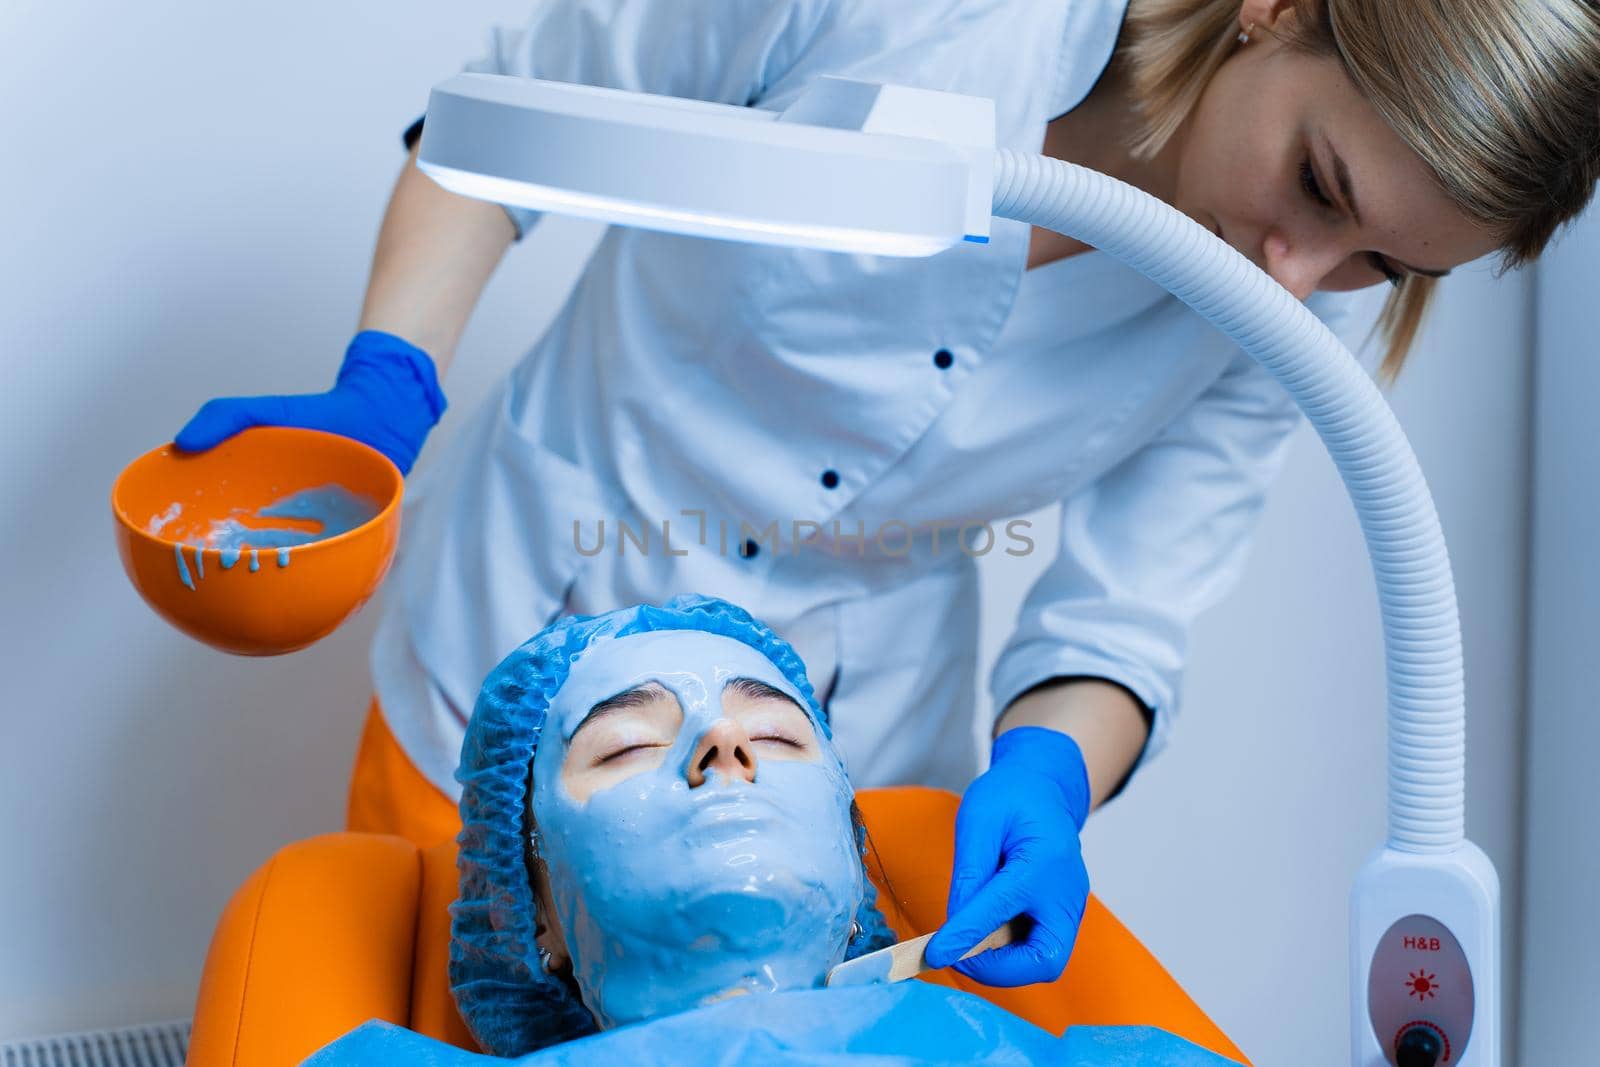 Alginate moisturizing mask for face and skin of young girl. Spa procedure for rejuvenation. beautician smears blue mask. Dermatology in medical clinic